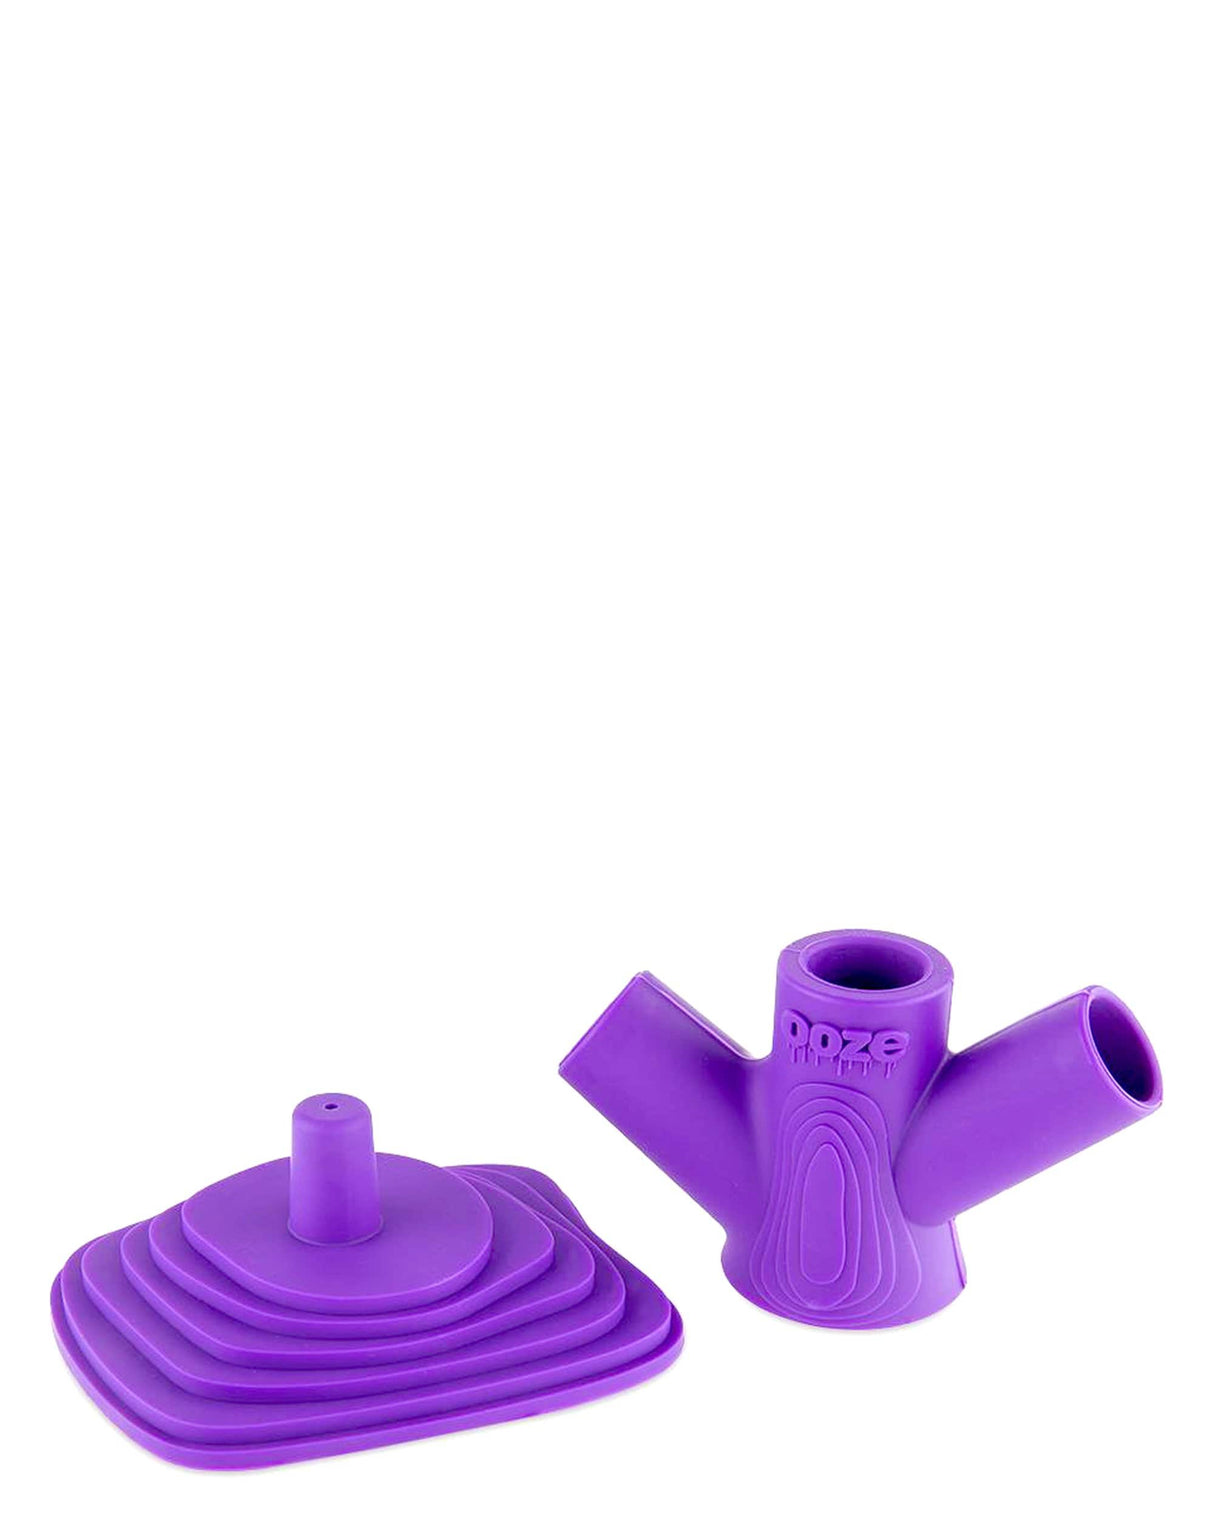 Ooze Banger Hanger Silicone Stand in Purple, ideal for 14-19mm joints, durable and compact design